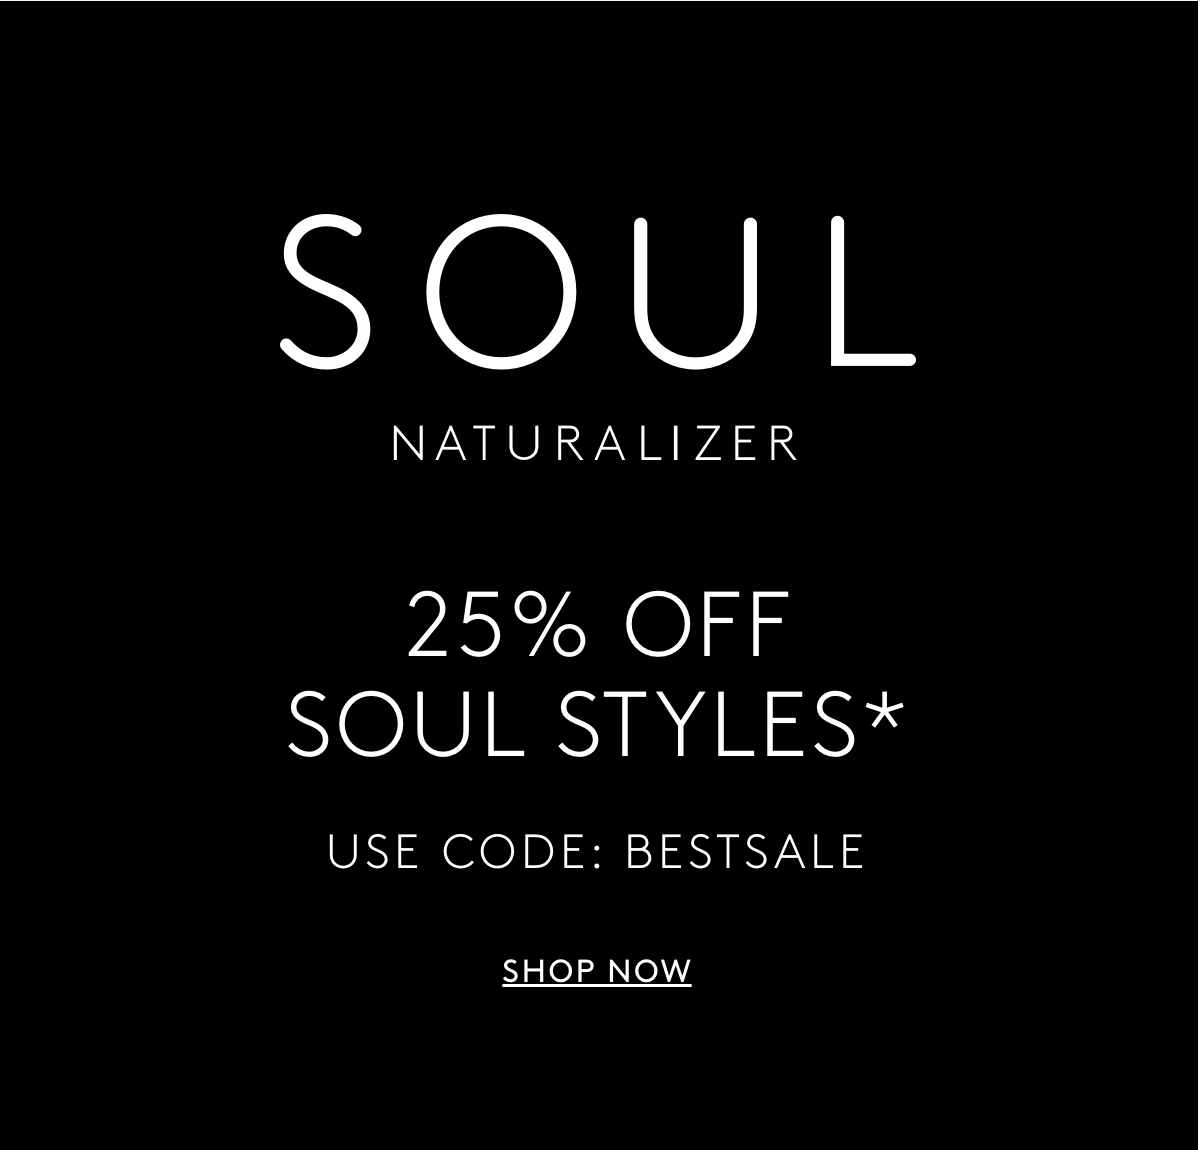 Soul Naturalizer - 25% Off Soul Styles* | Use Code: BESTSALE | Shop Now